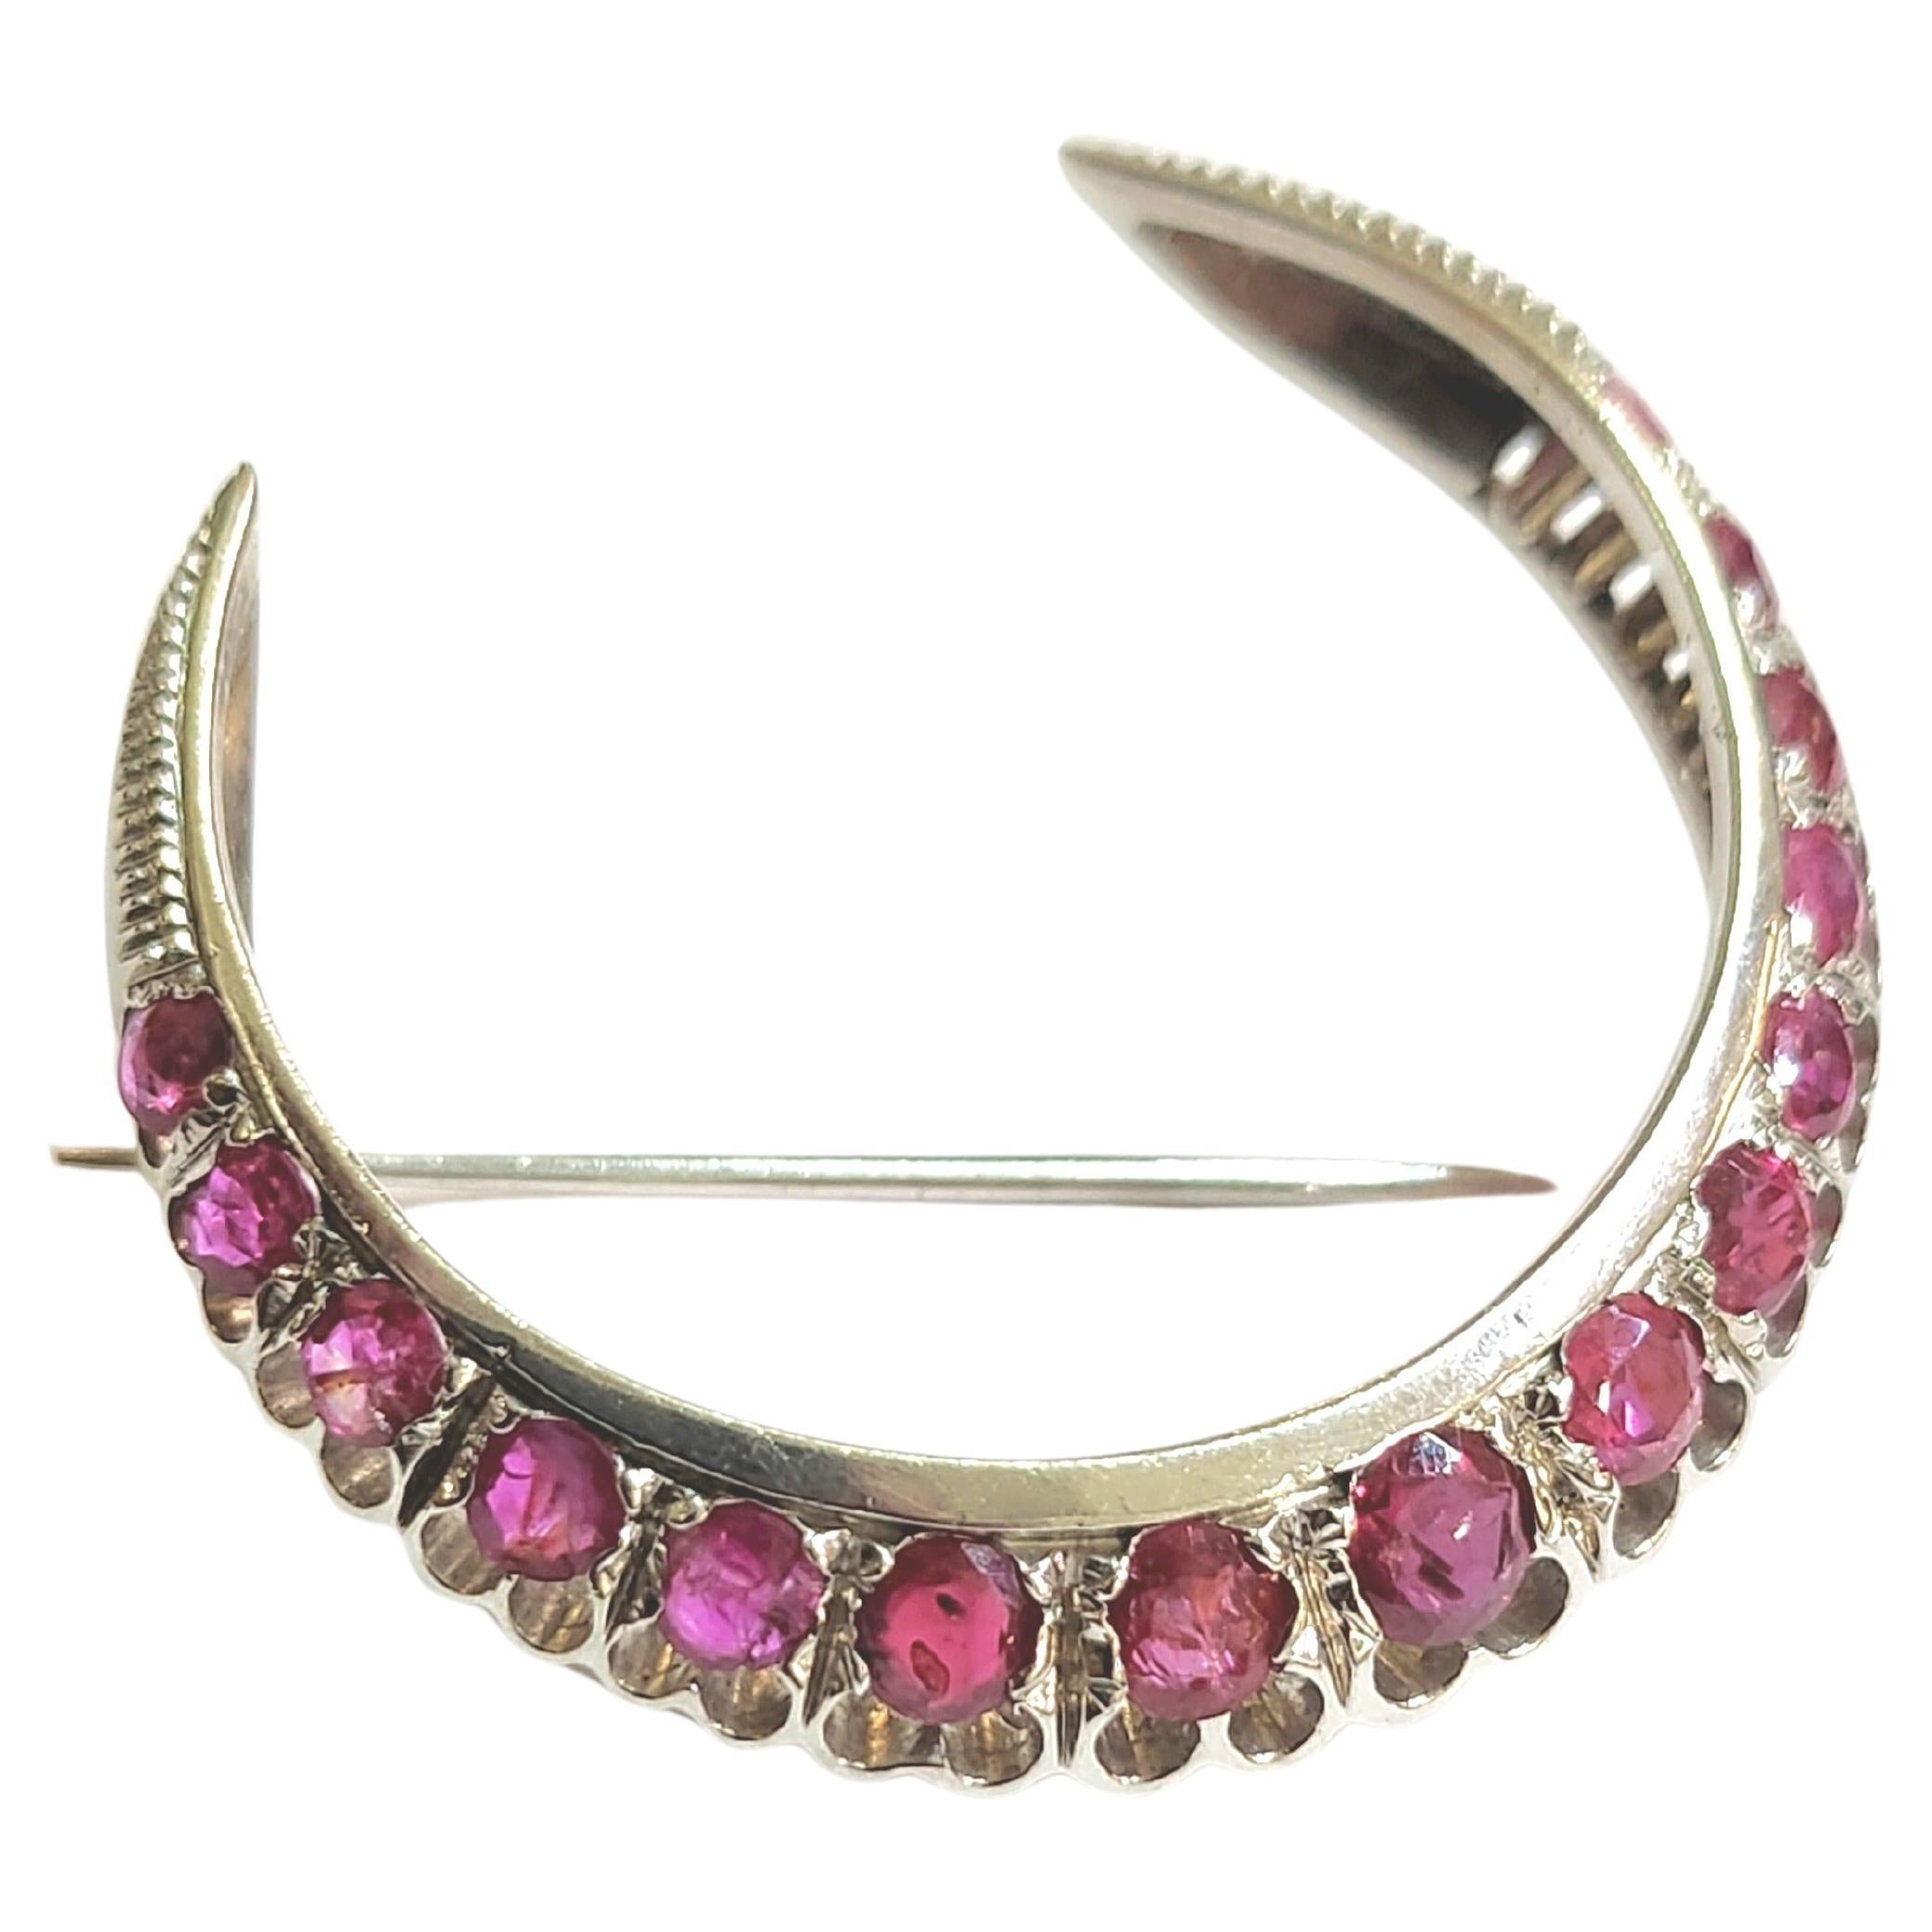 Vintage 18k white gold brooch in crescent designe decorted with natural rubies estimate weight of 2 to 2.5 carats hall marked 750 gold standard in very fine workmanship